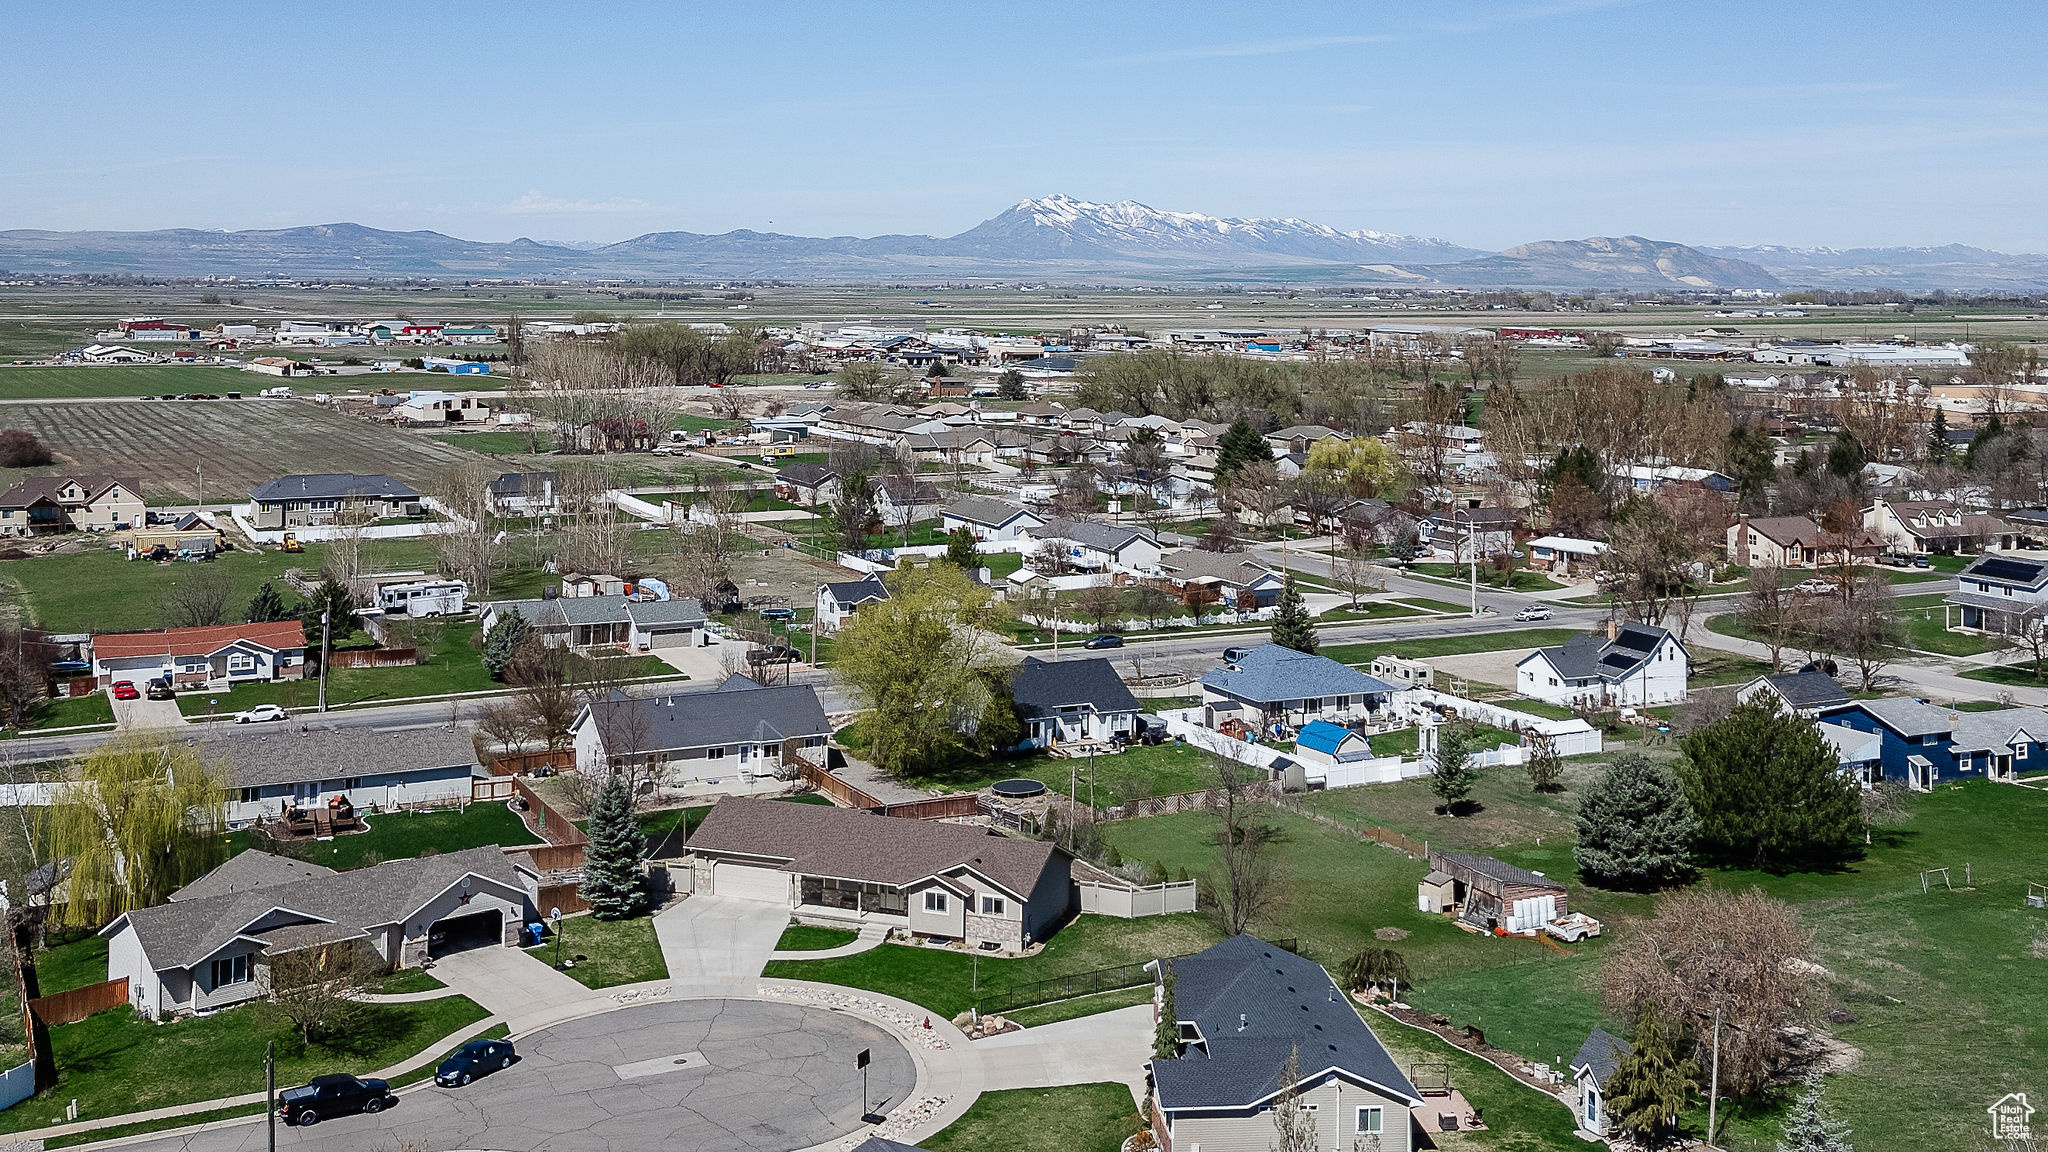 Birds eye view of property, with views of the Wellsville Mountain Range.